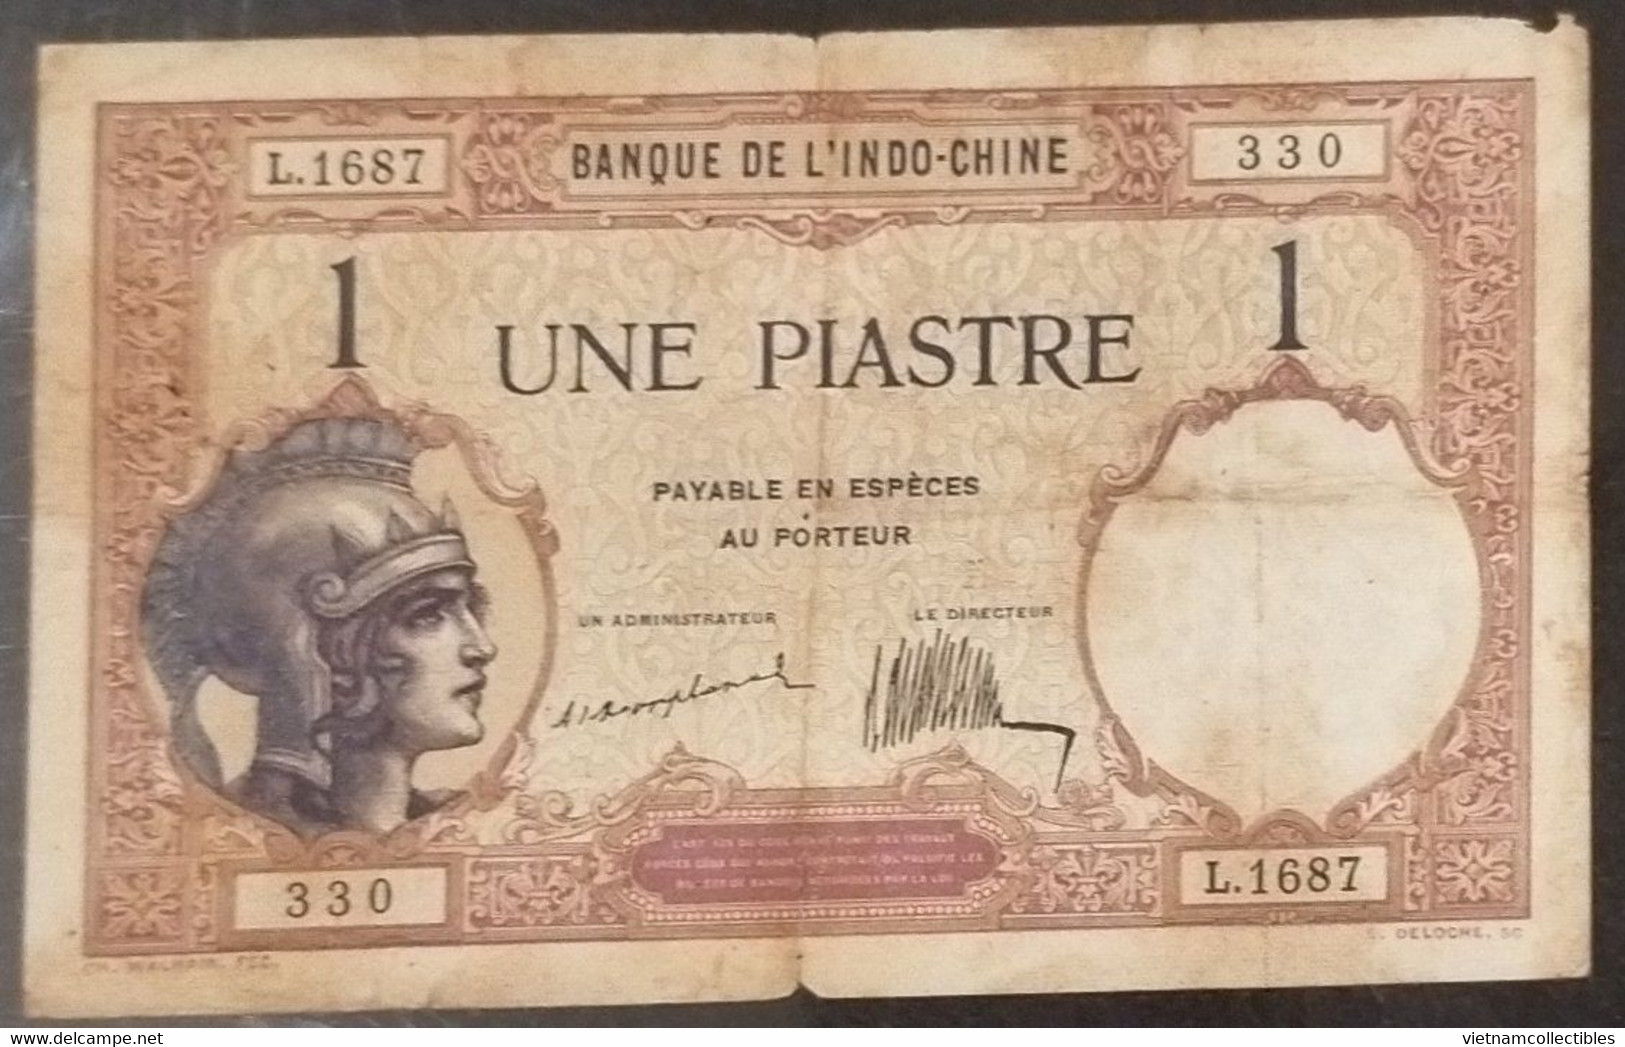 French Indochina Indo China Indochine Laos Vietnam Cambodia 1 Piastre Fine Banknote Note 1921-31 - Pick # 48a / 2 Photos - Indochine